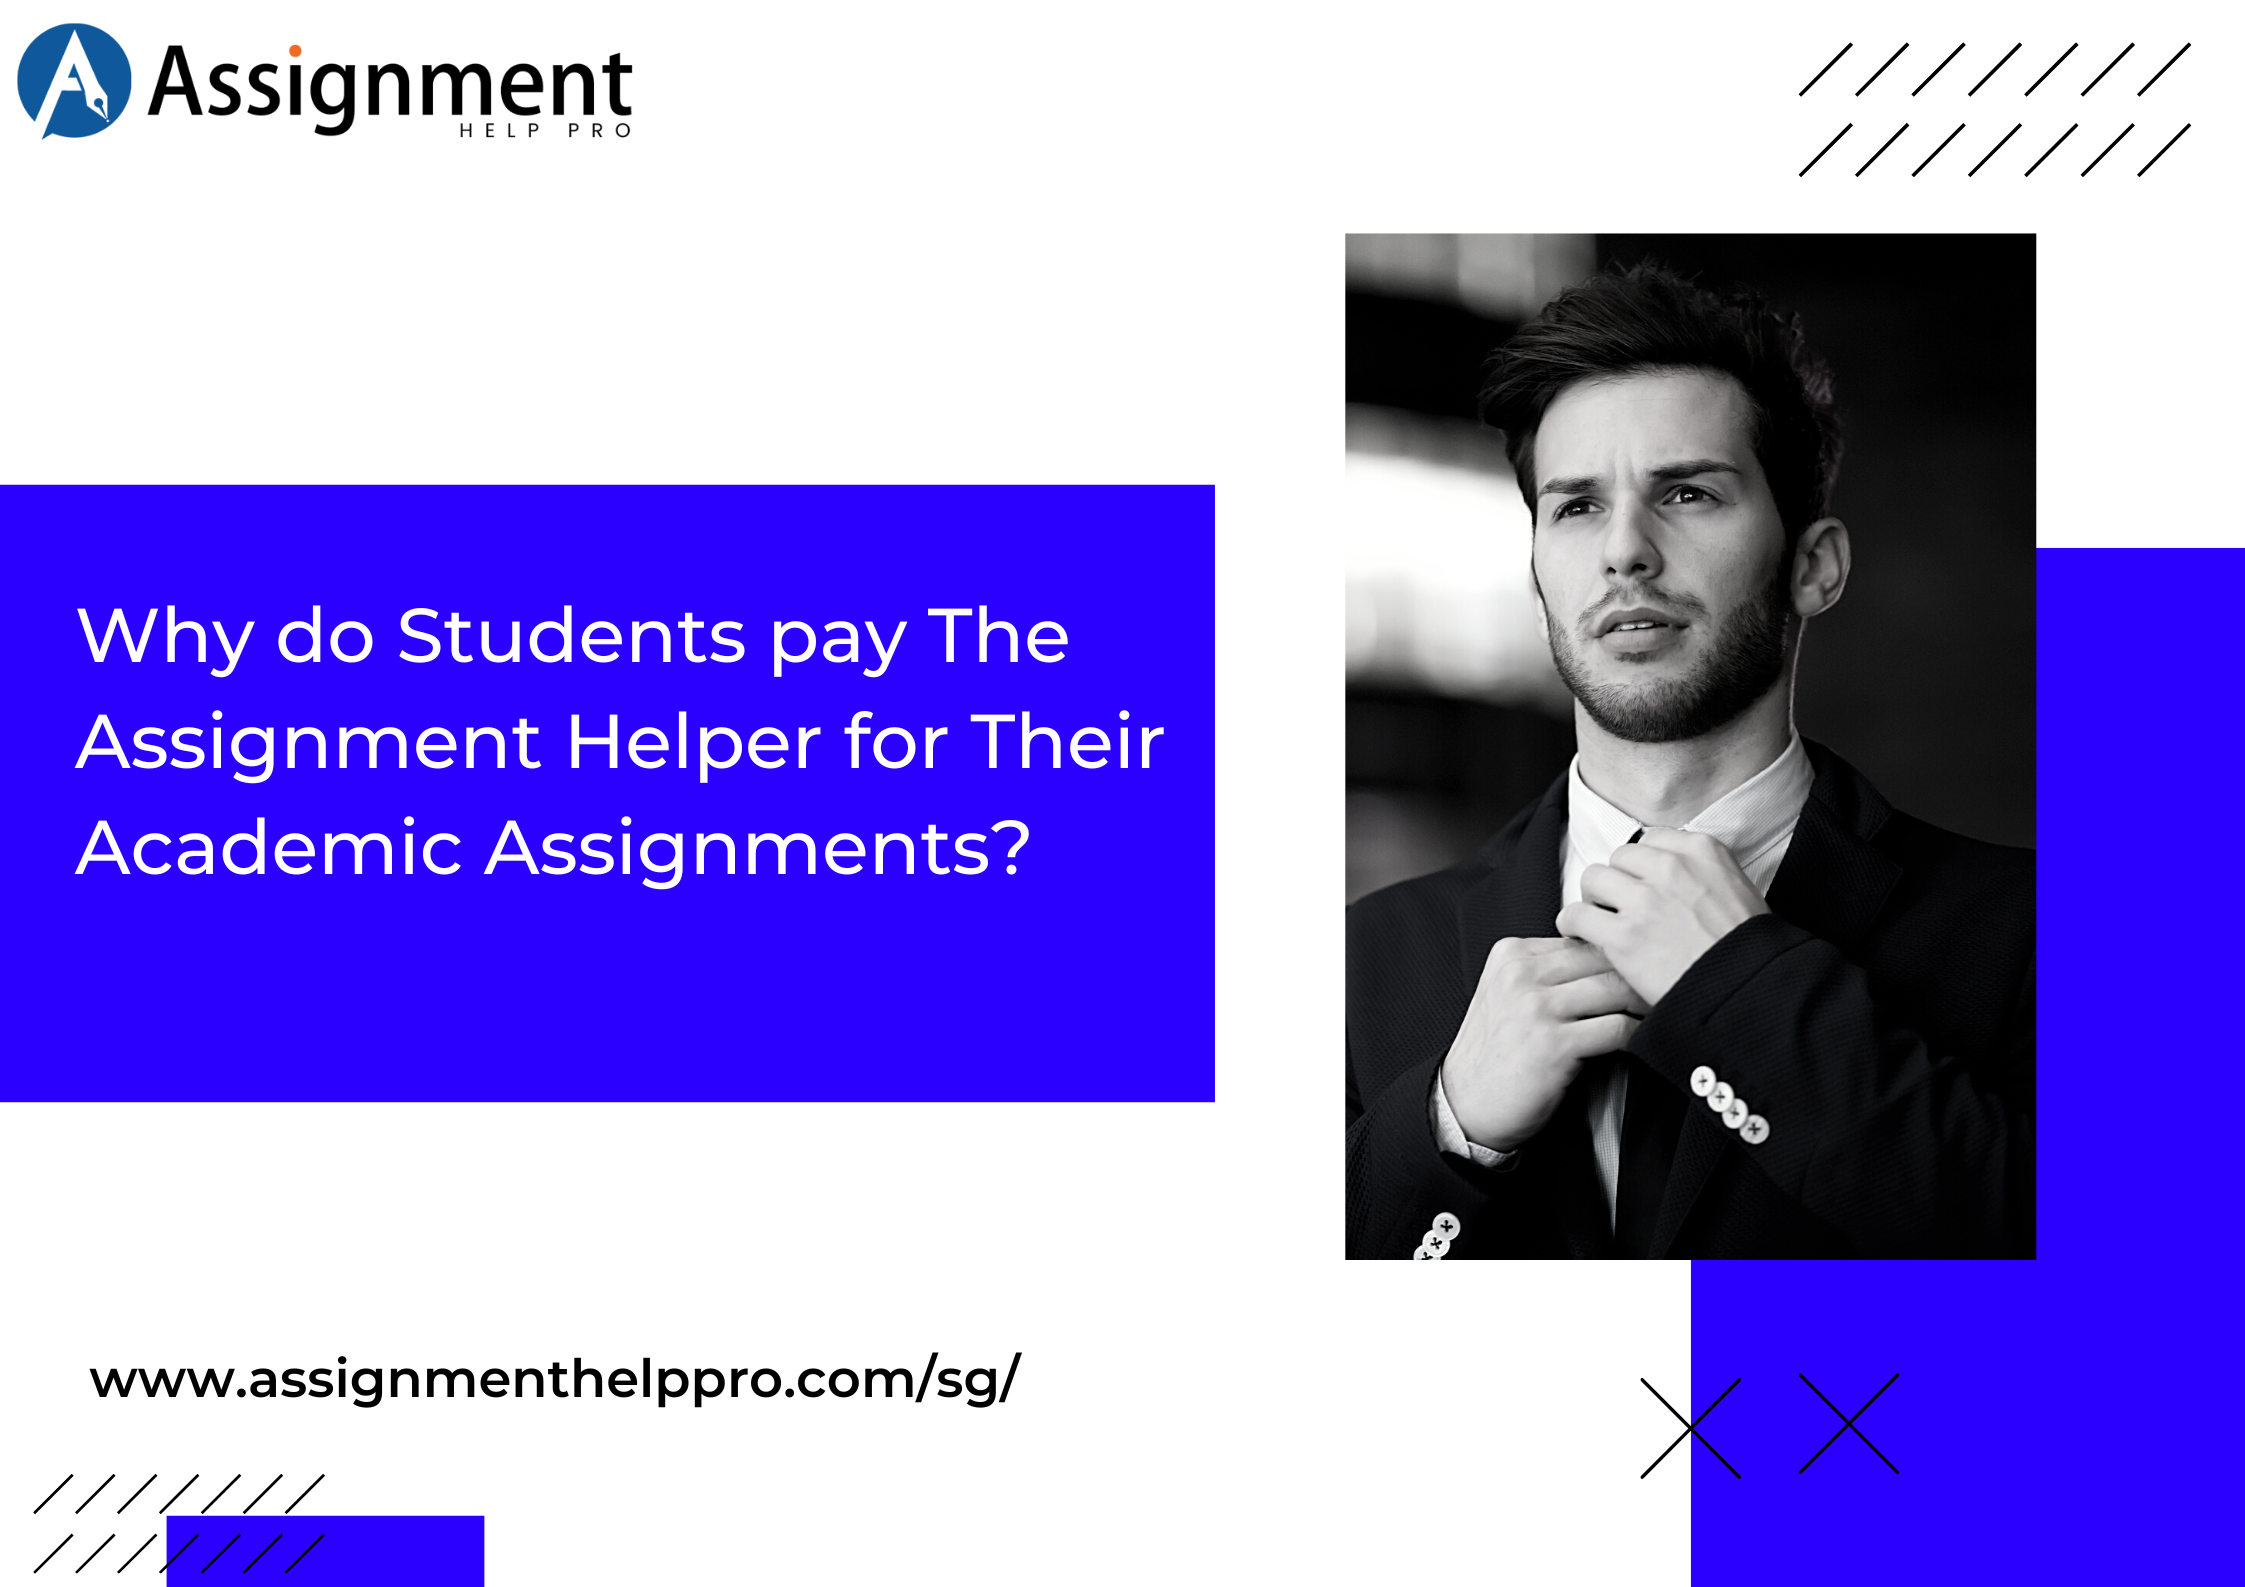 Why do Students pay Assignment Helper for Their Assignments?